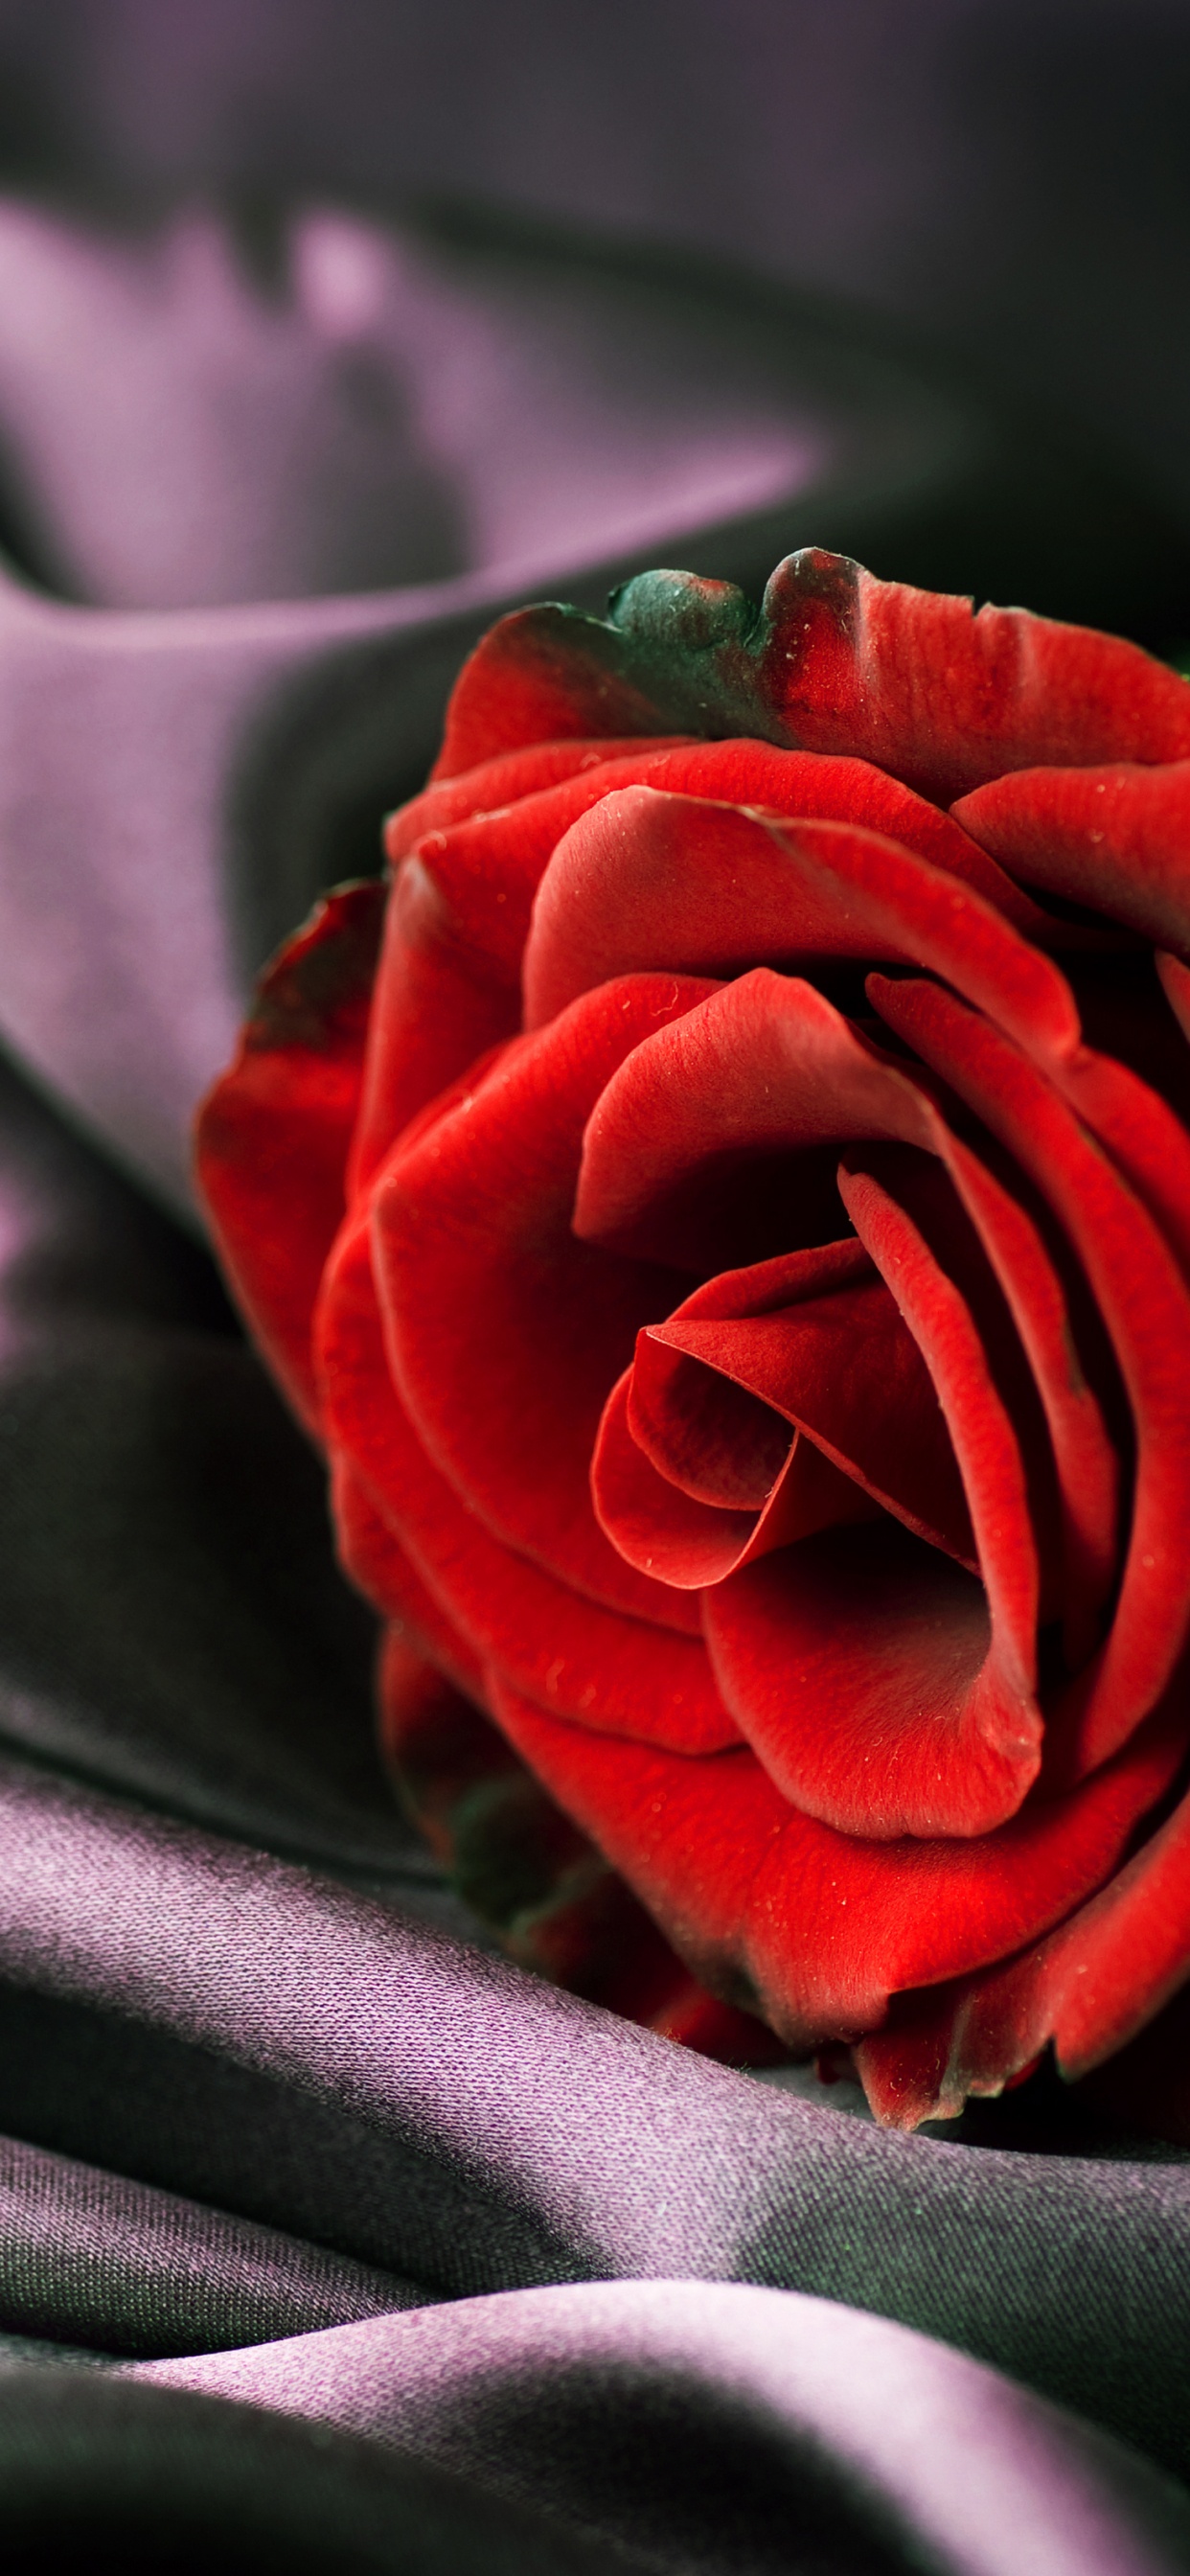 Red Rose on Gray Textile. Wallpaper in 1242x2688 Resolution